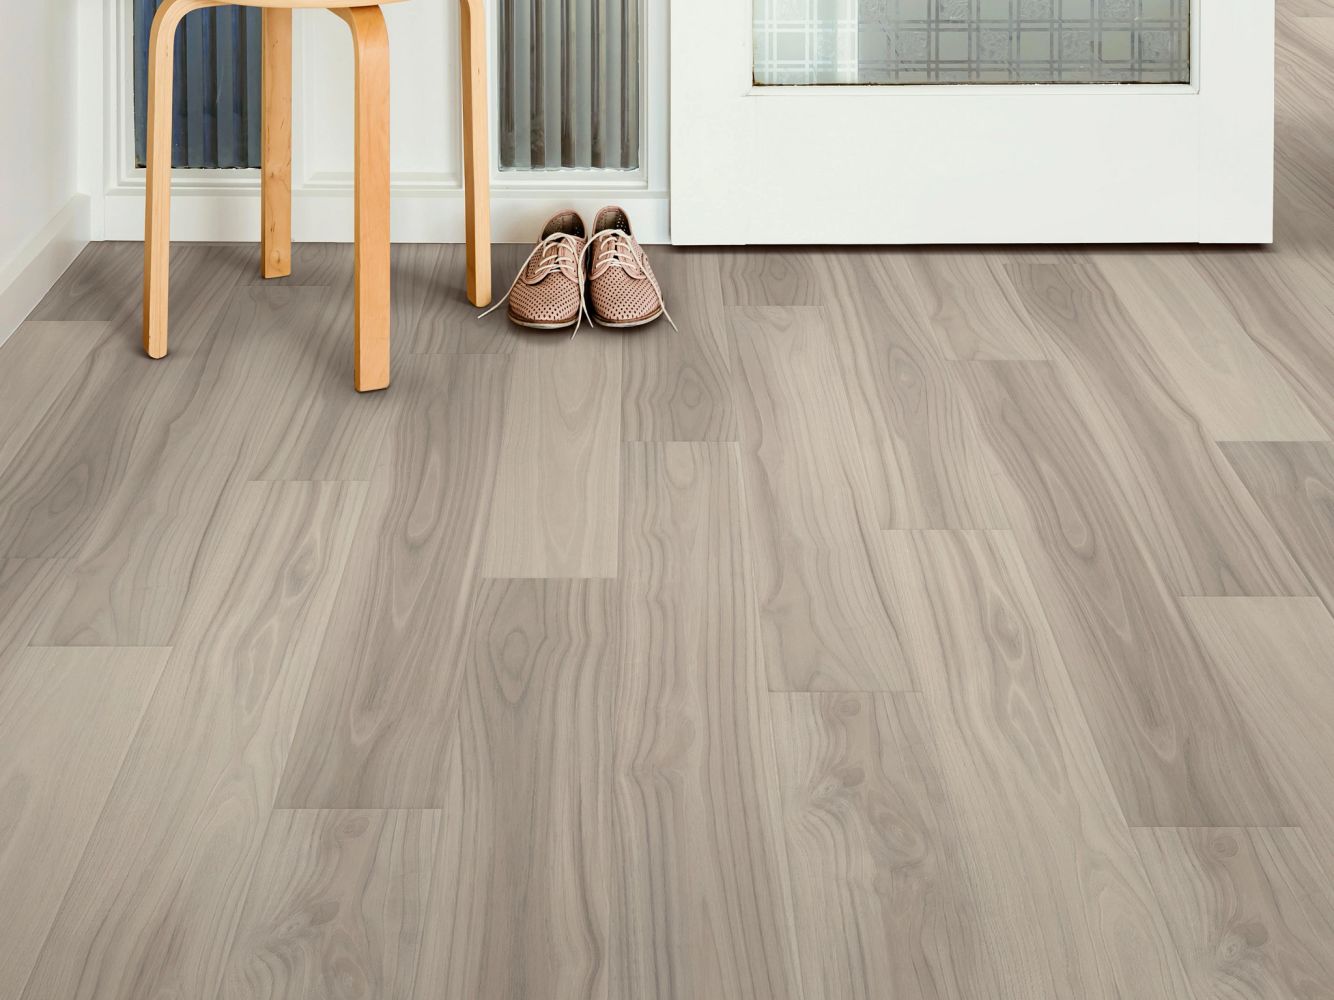 Shaw Floors Resilient Residential Pantheon Hd+ Natural Bevel Smoke 05130_1051V